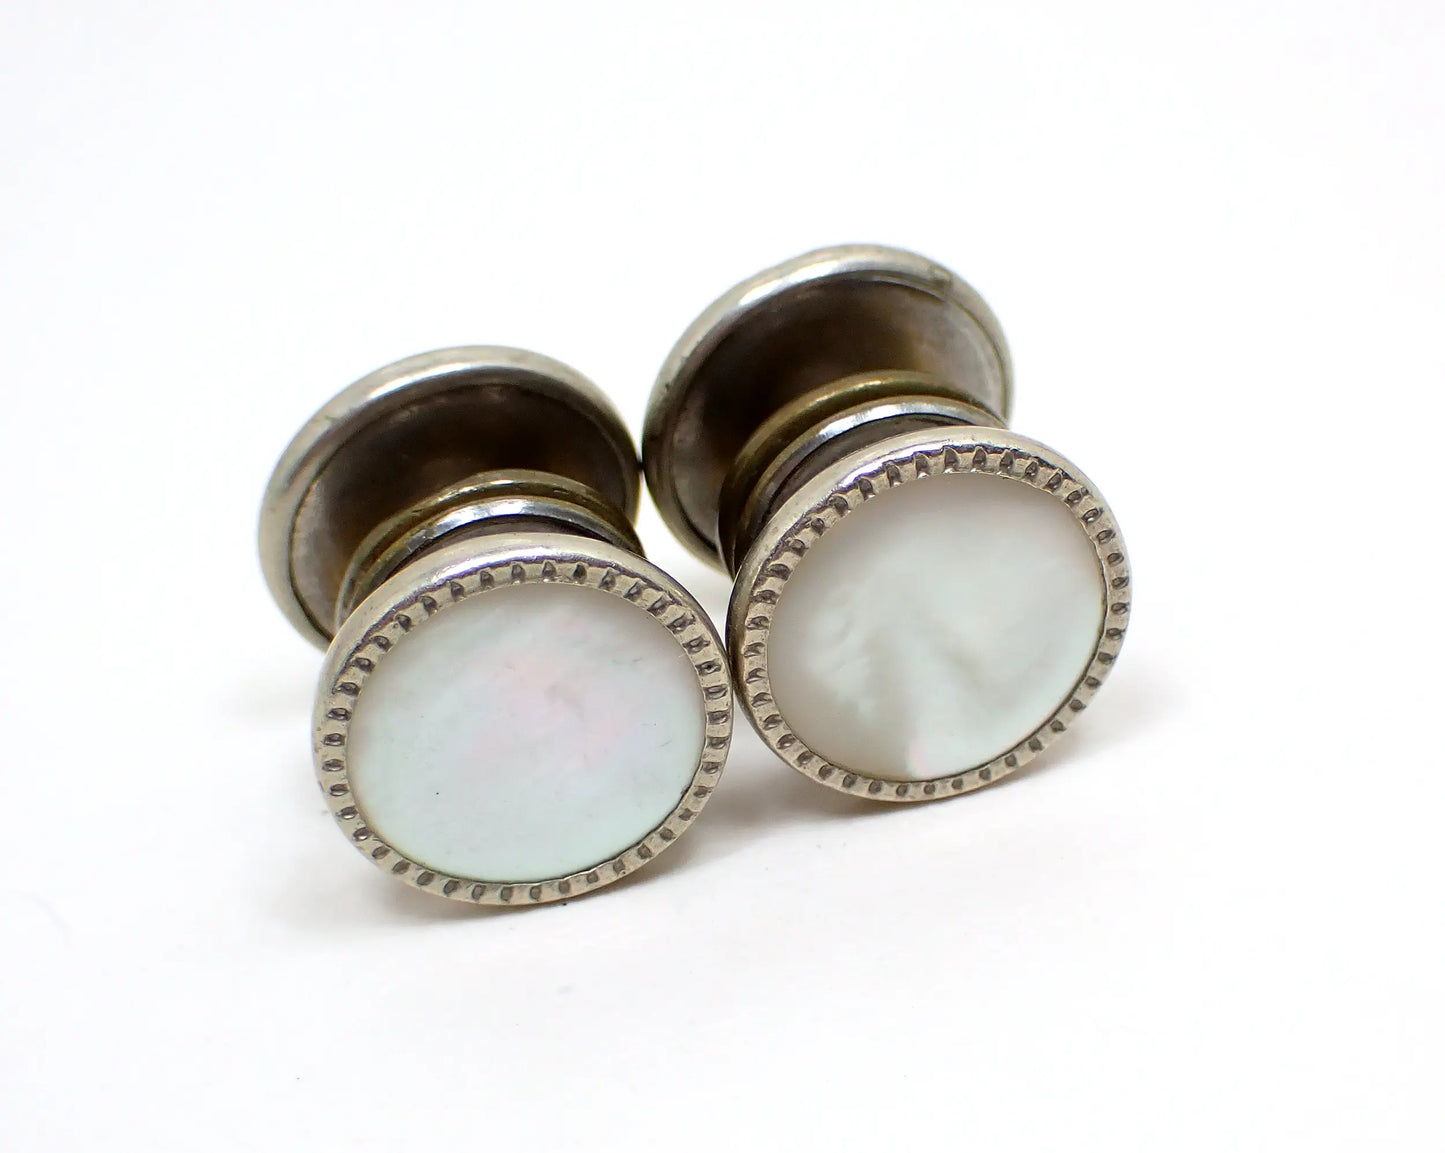 1920s Art Deco Round Mother of Pearl Vintage Cufflinks, Snap Link Cuff Links